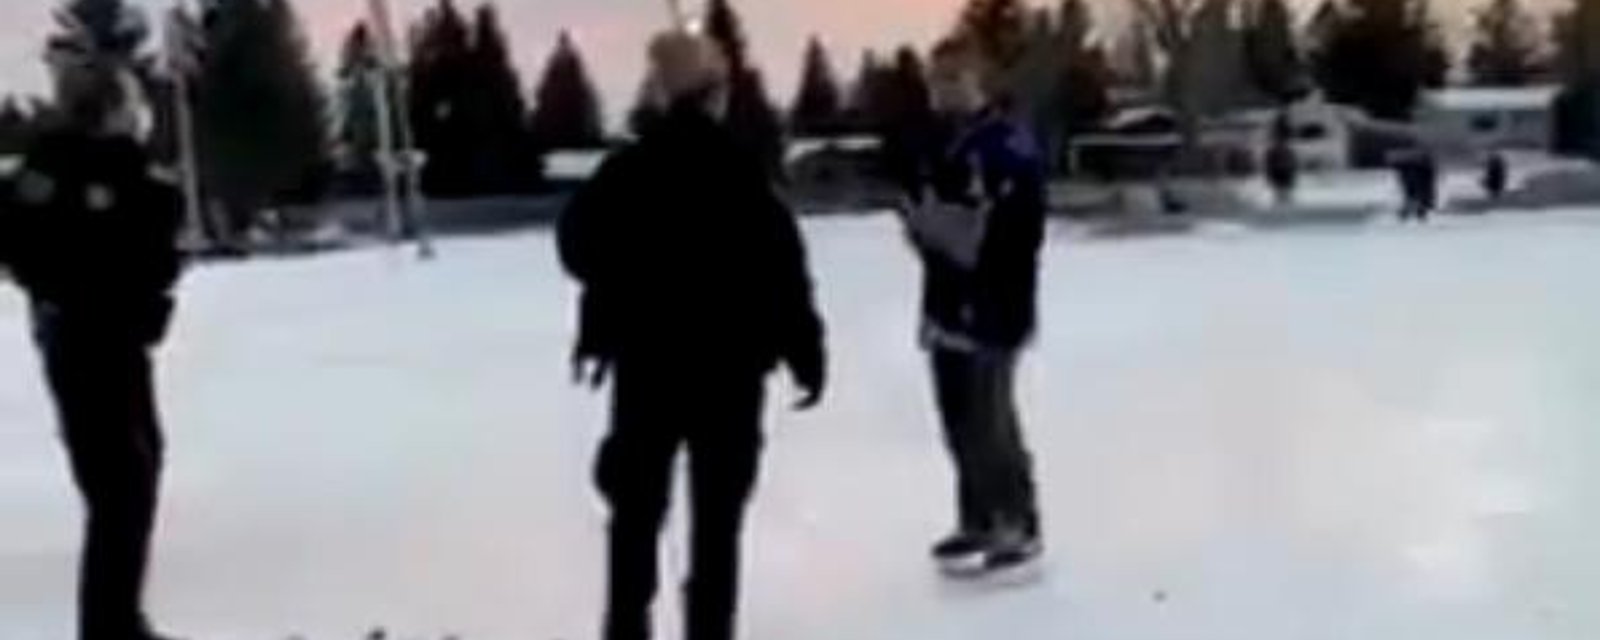 Man violently arrested by Canadian police while playing outdoor hockey.